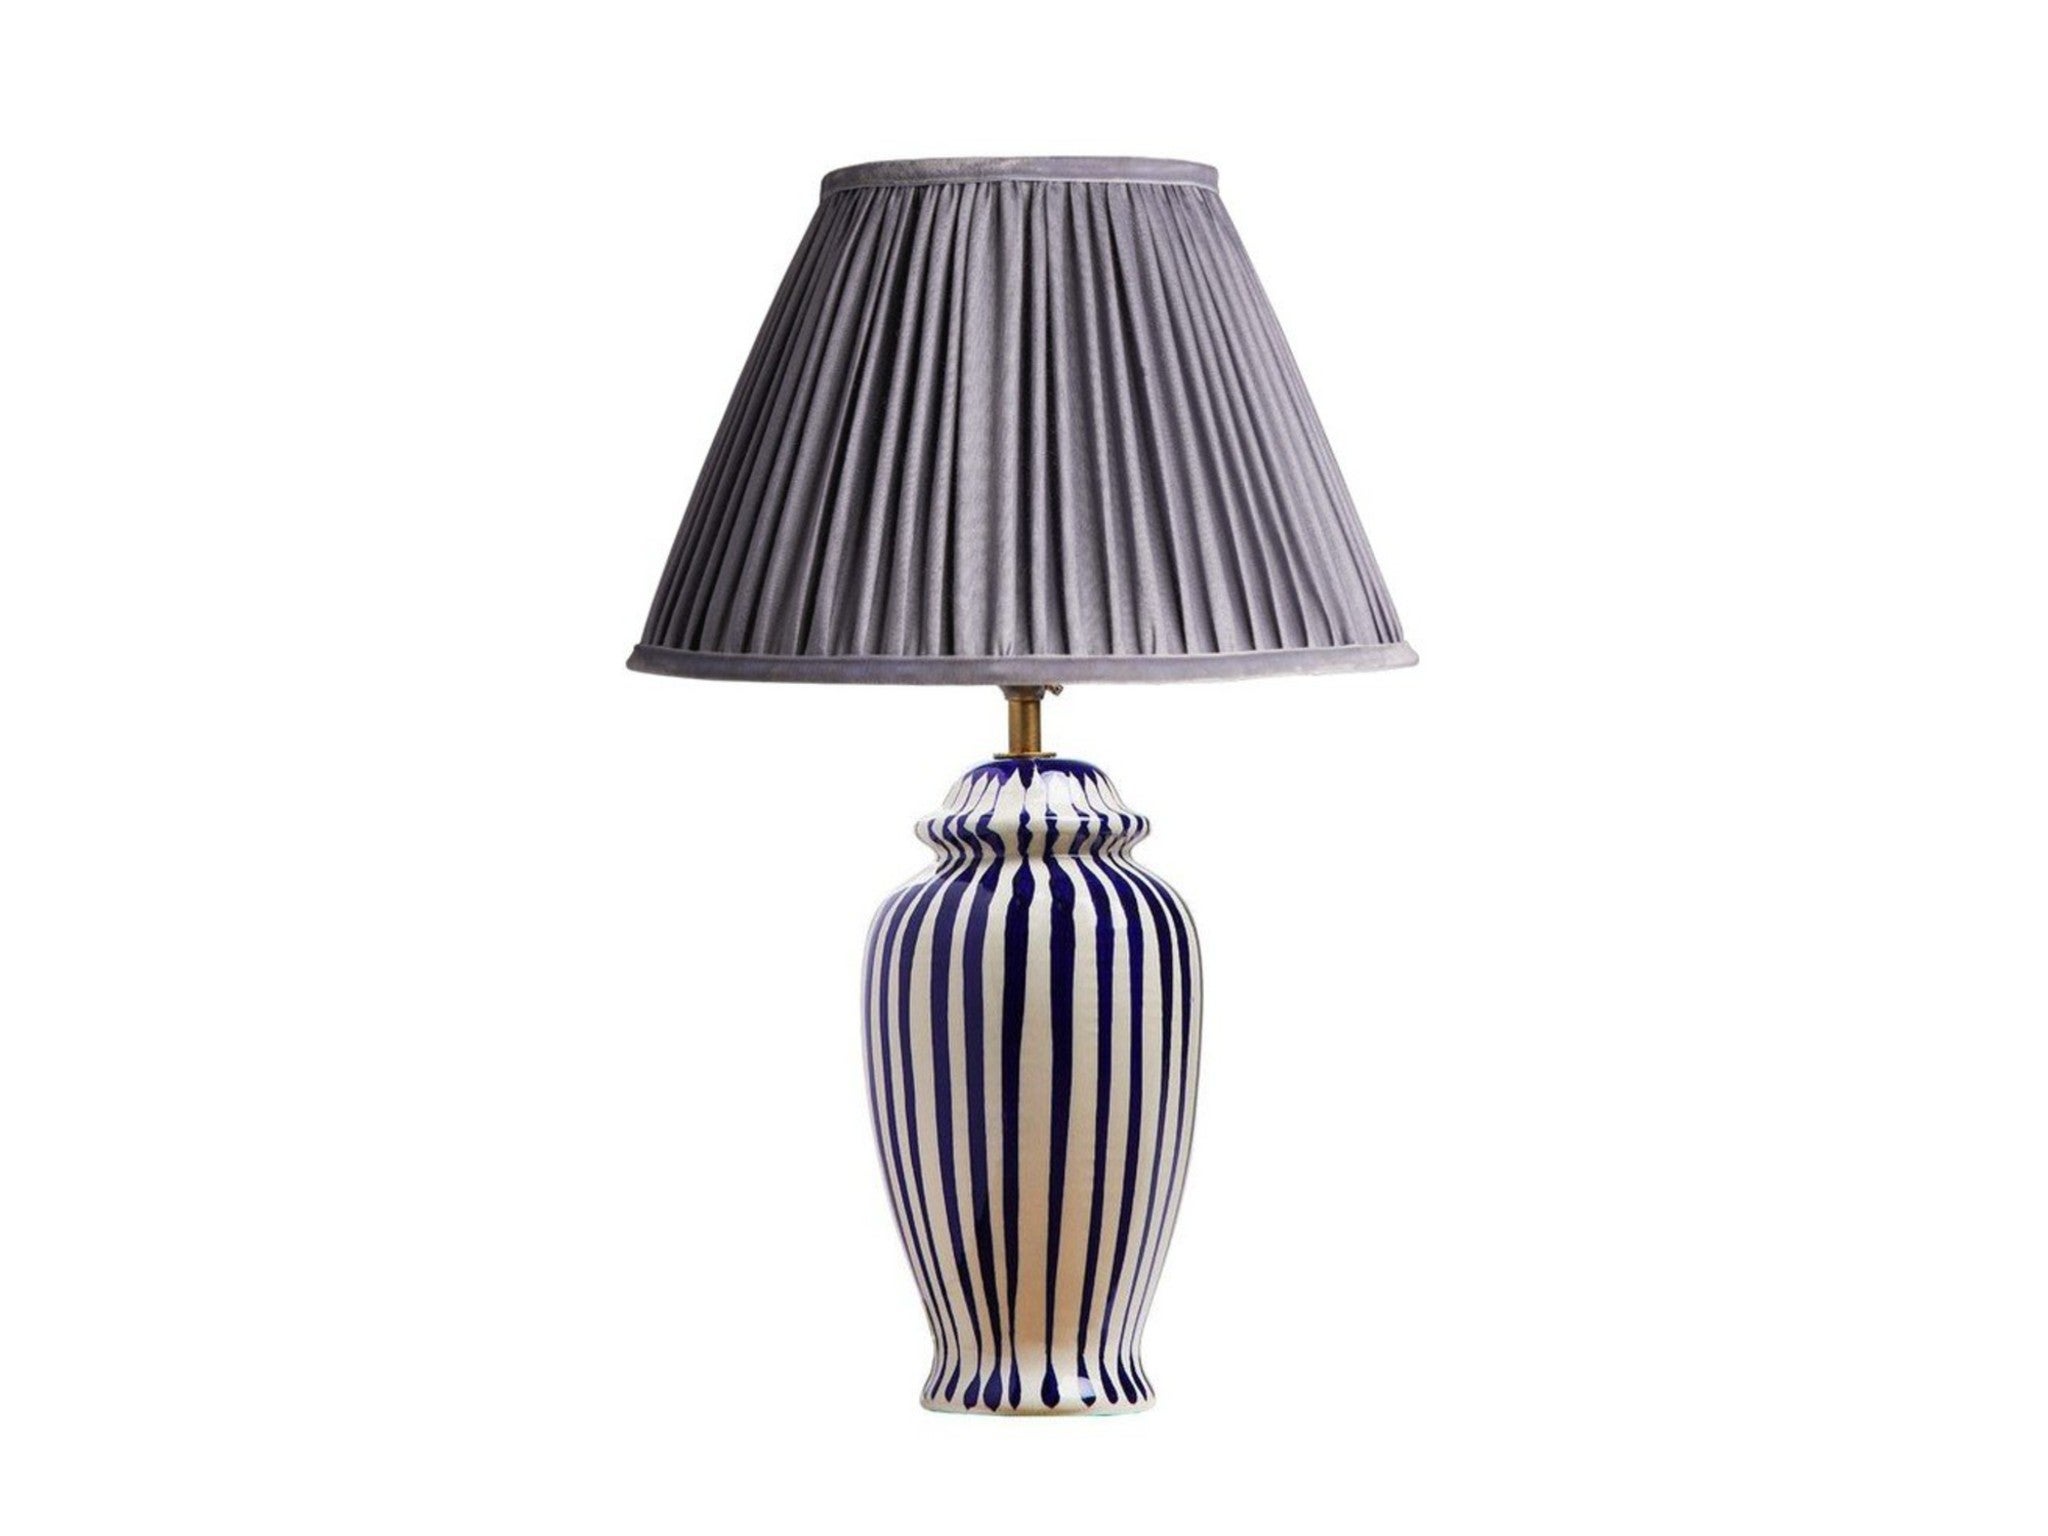 Pooky lottie bedside lamp in a cobalt blue and stone glaze indybest.jpeg